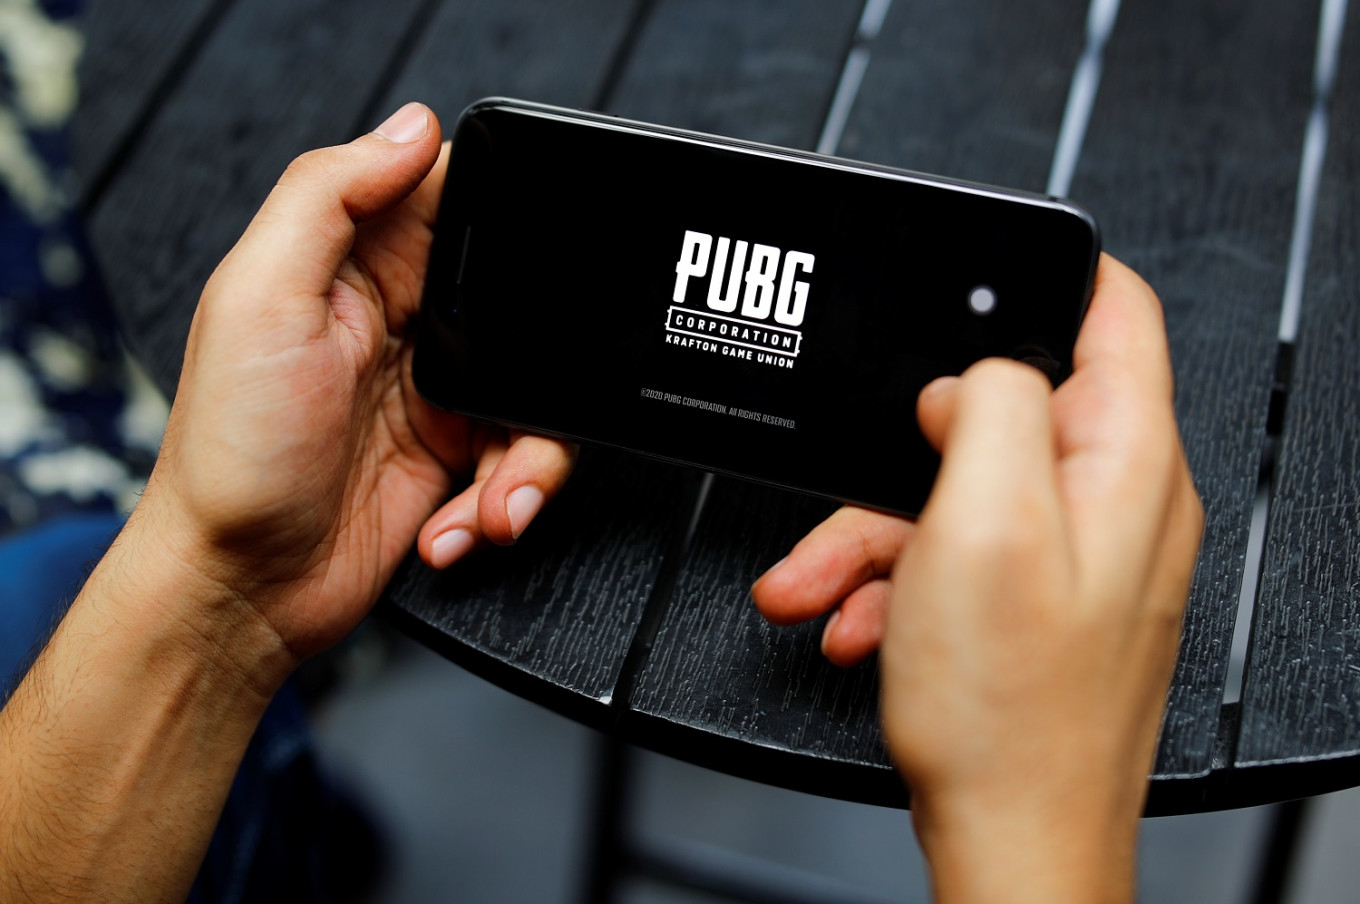 New Indian version of hit PUBG mobile game to be launched after  China-focused ban - Science & Tech - The Jakarta Post